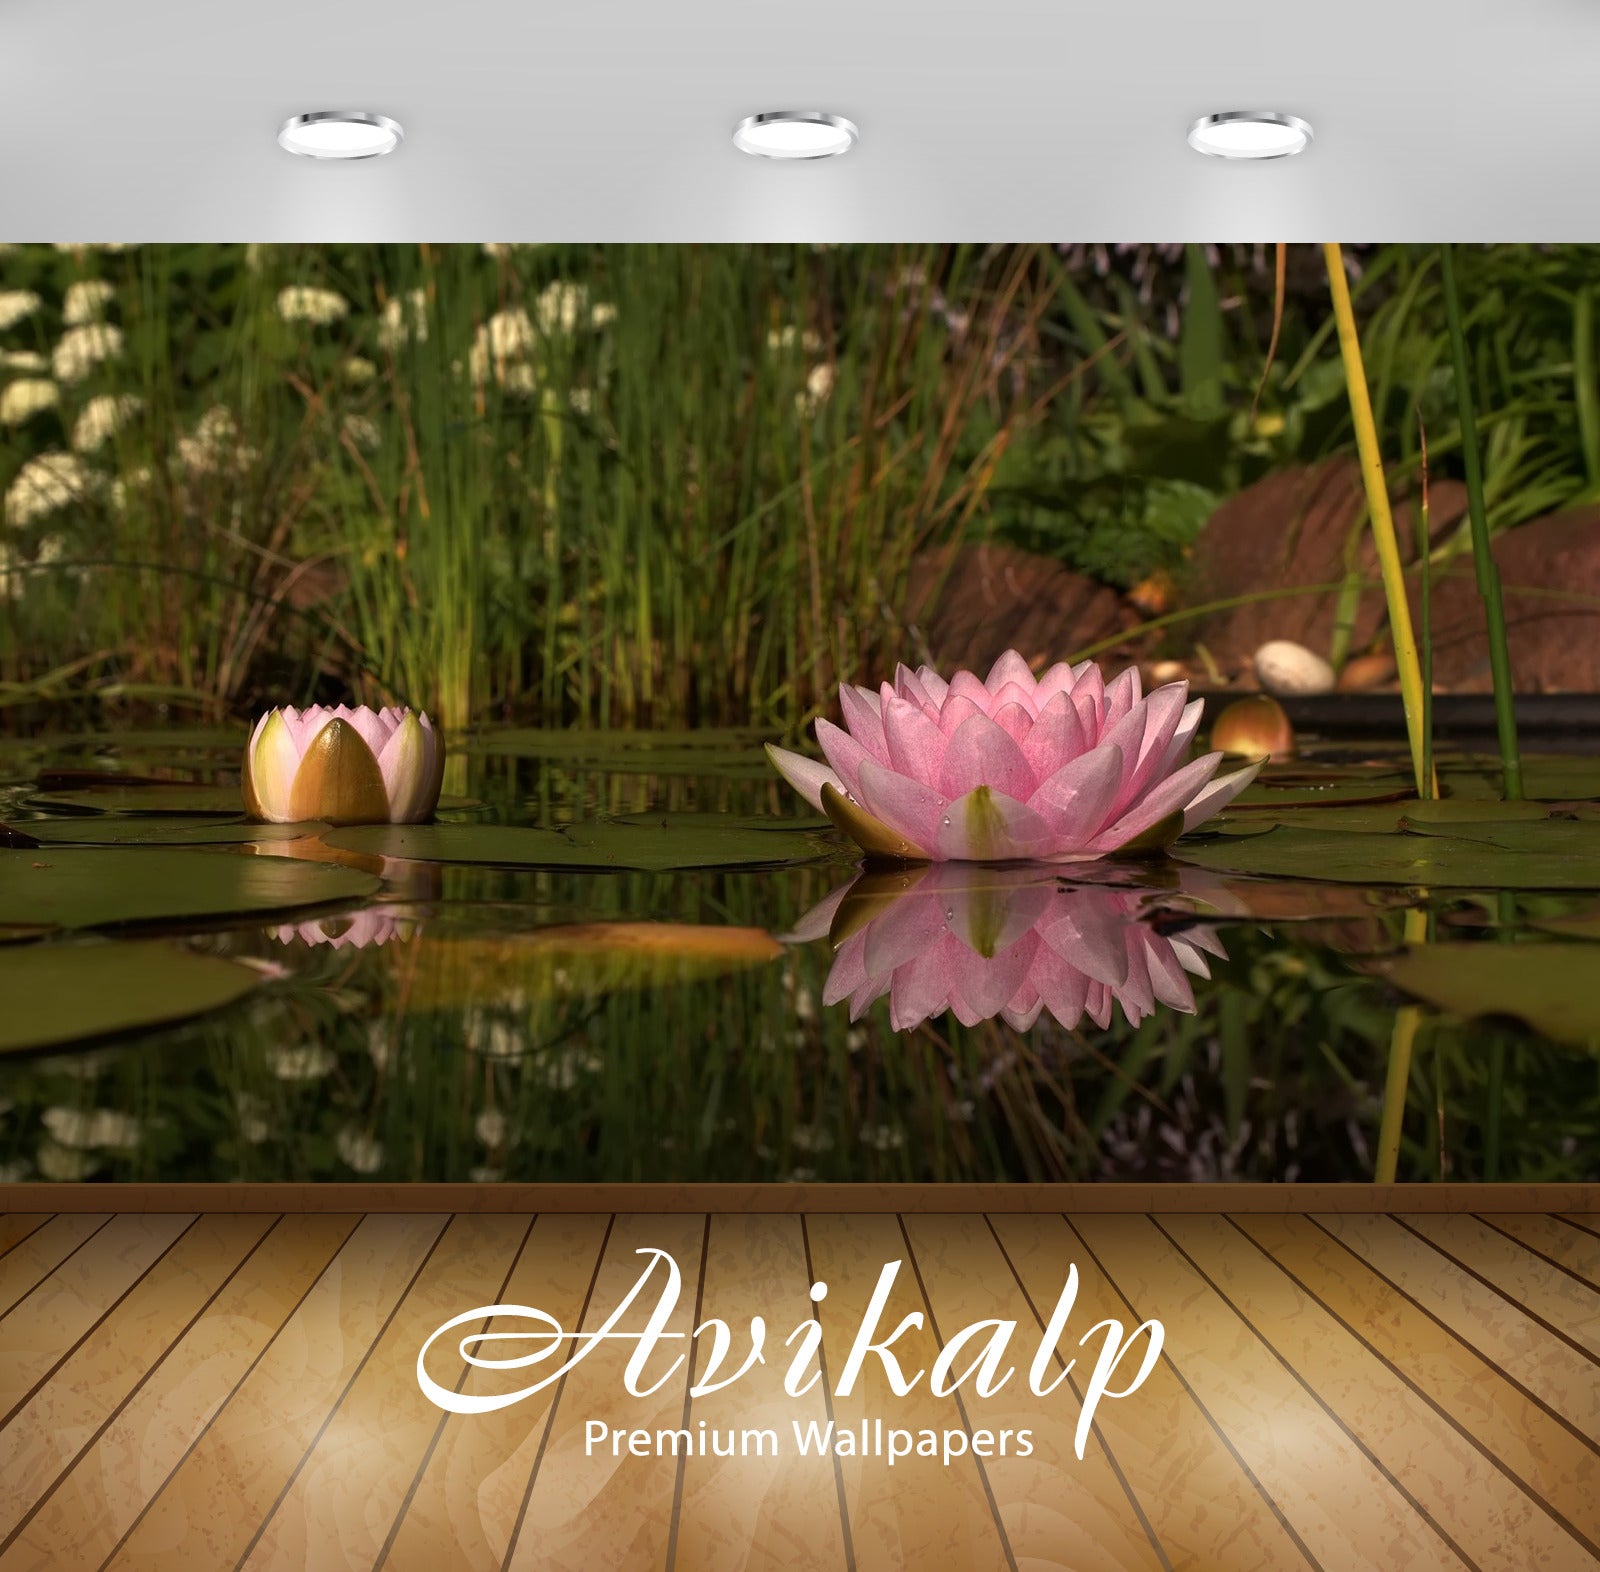 Avikalp Exclusive Awi1312 Lotus Full HD Wallpapers for Living room, Hall, Kids Room, Kitchen, TV Bac